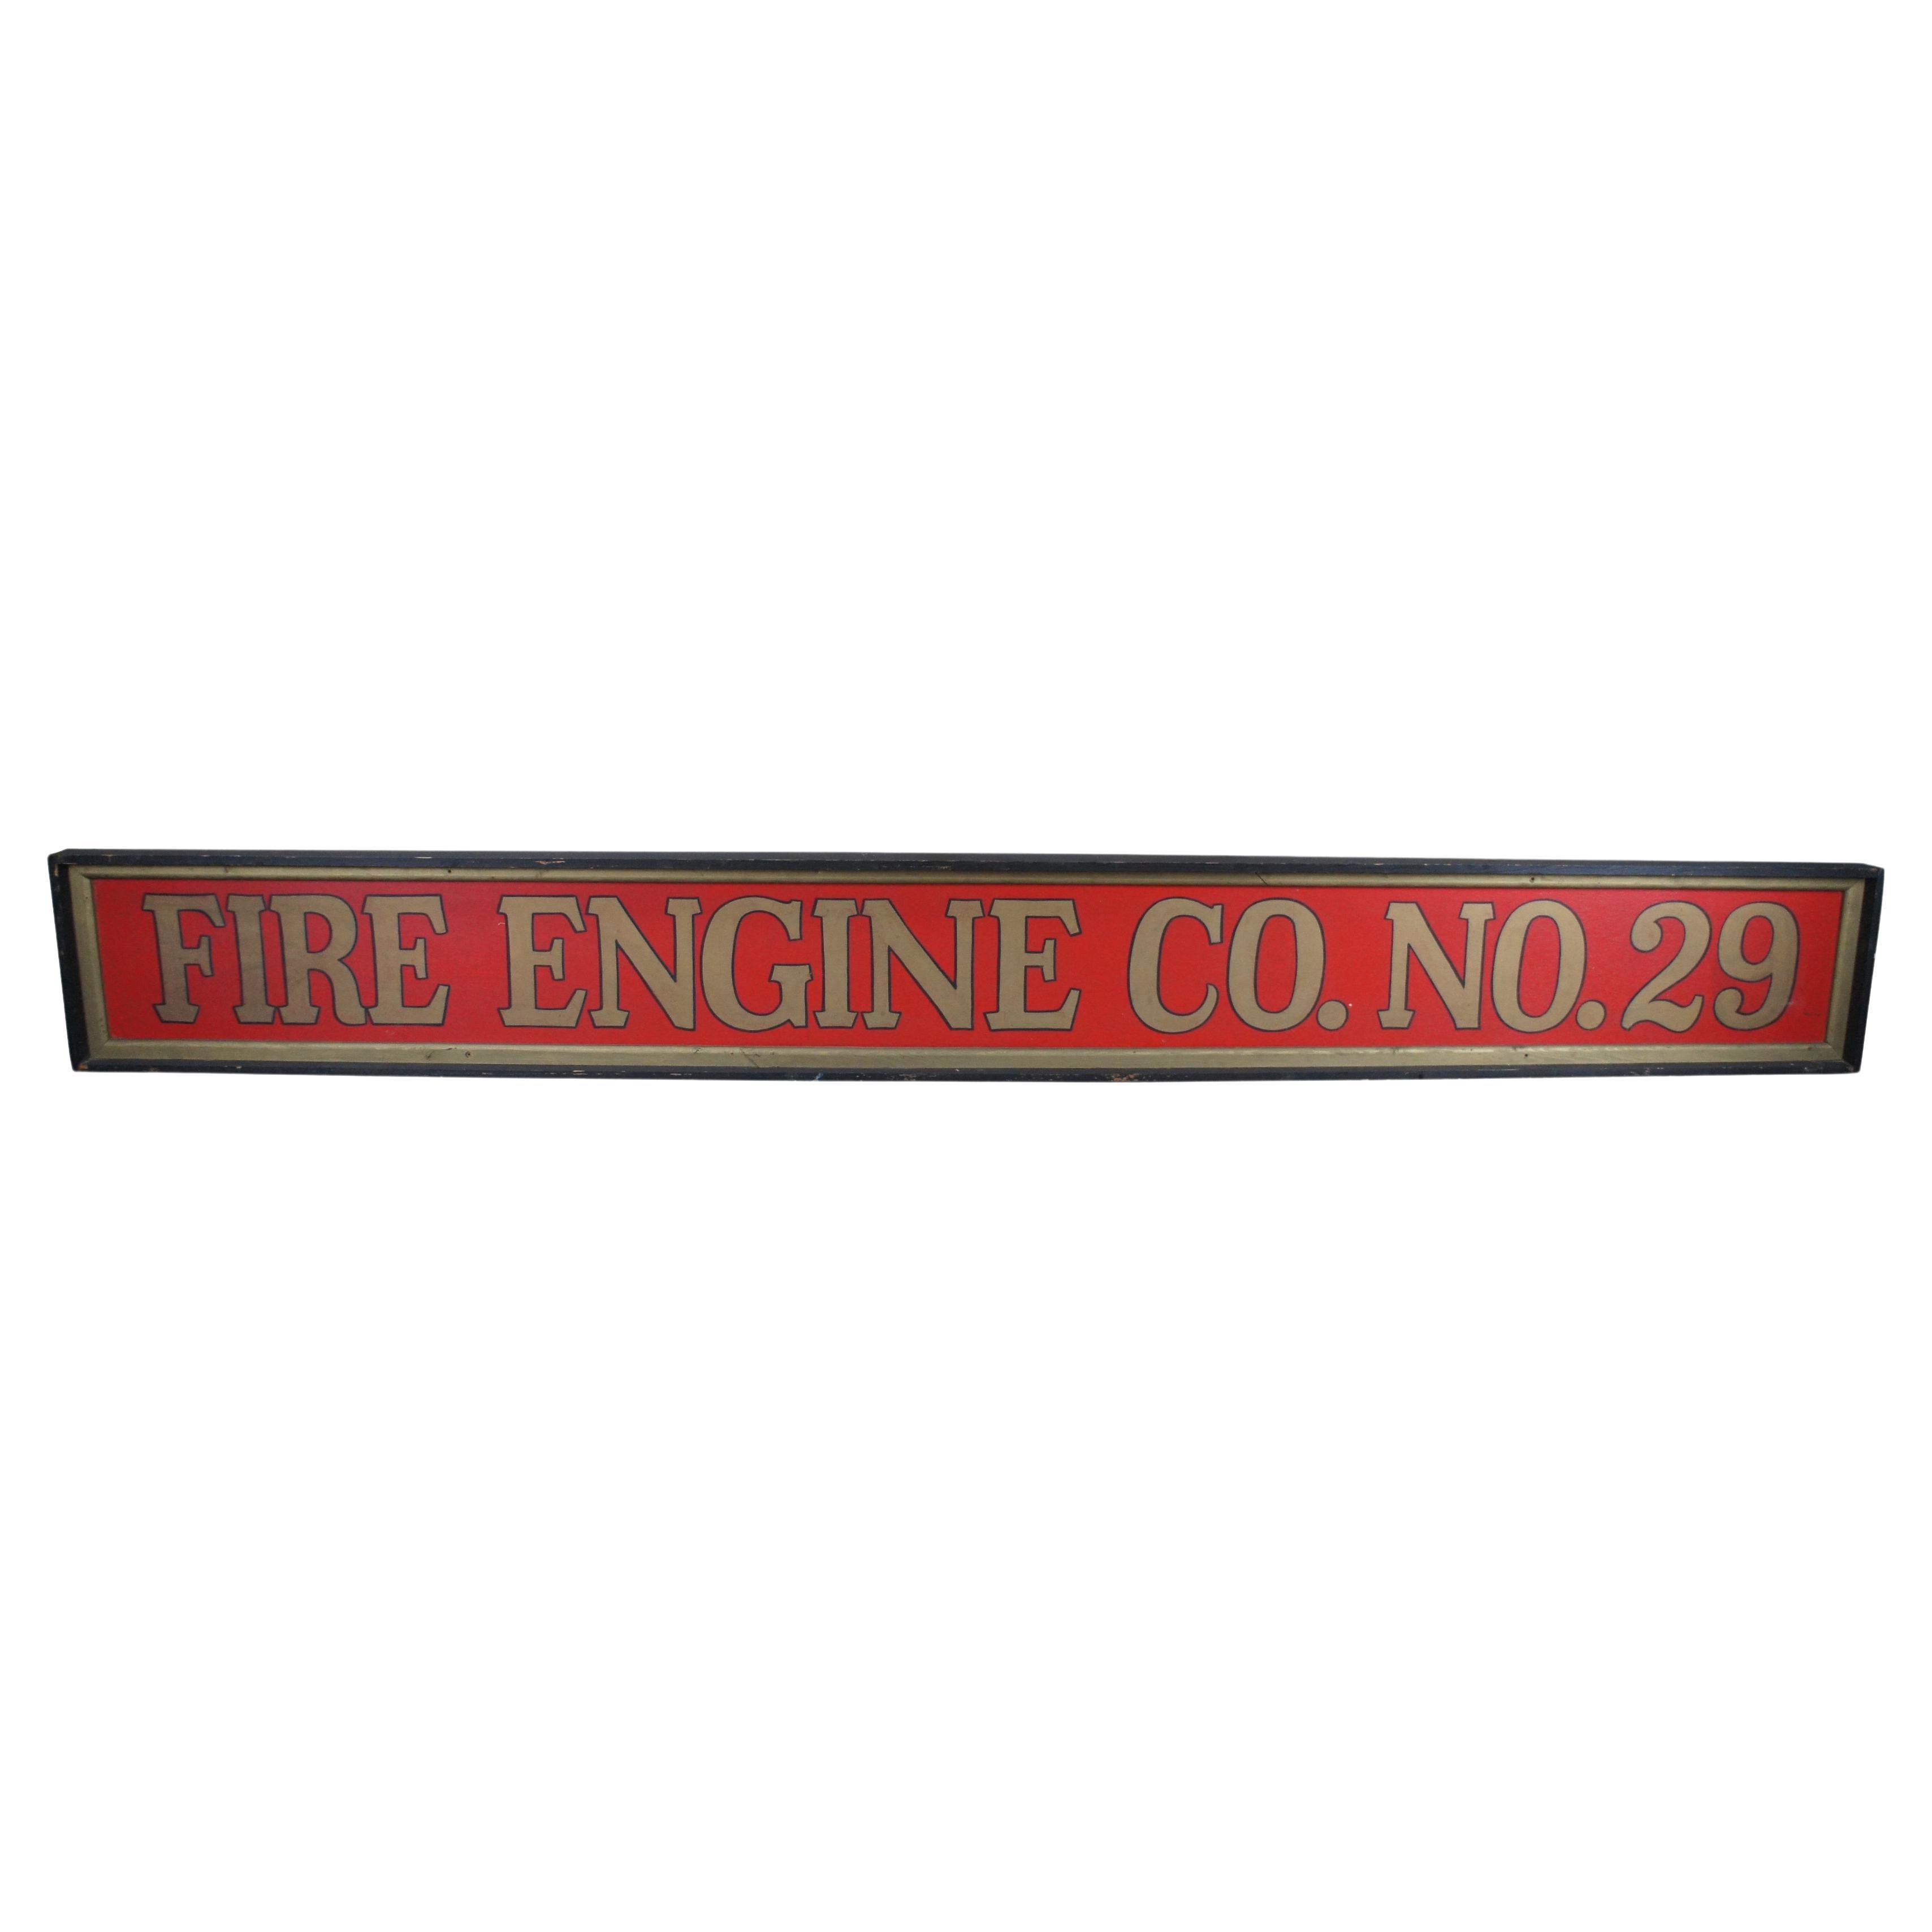 Monumental Vintage Fire Engline No. 29 Firefighter Advertising Sign 146" For Sale